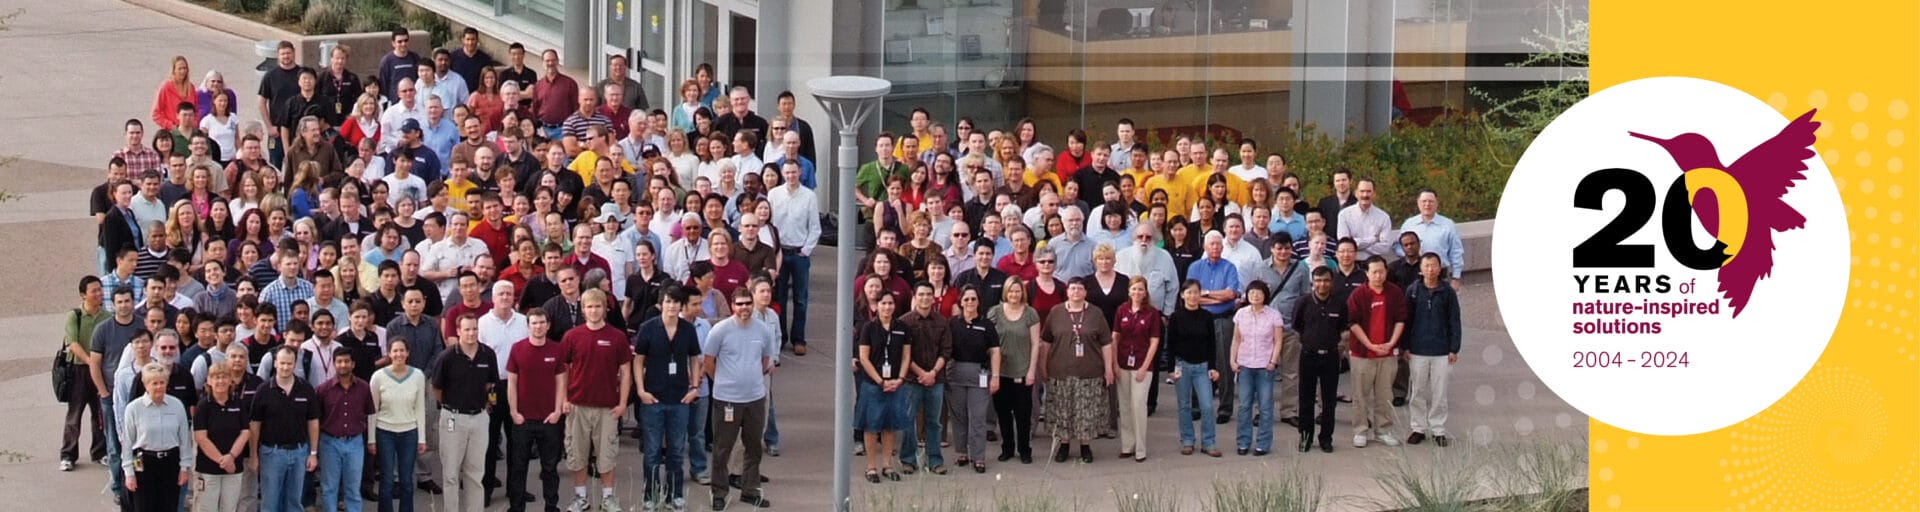 Group photo of Biodesign employees with 20th anniversary logo.